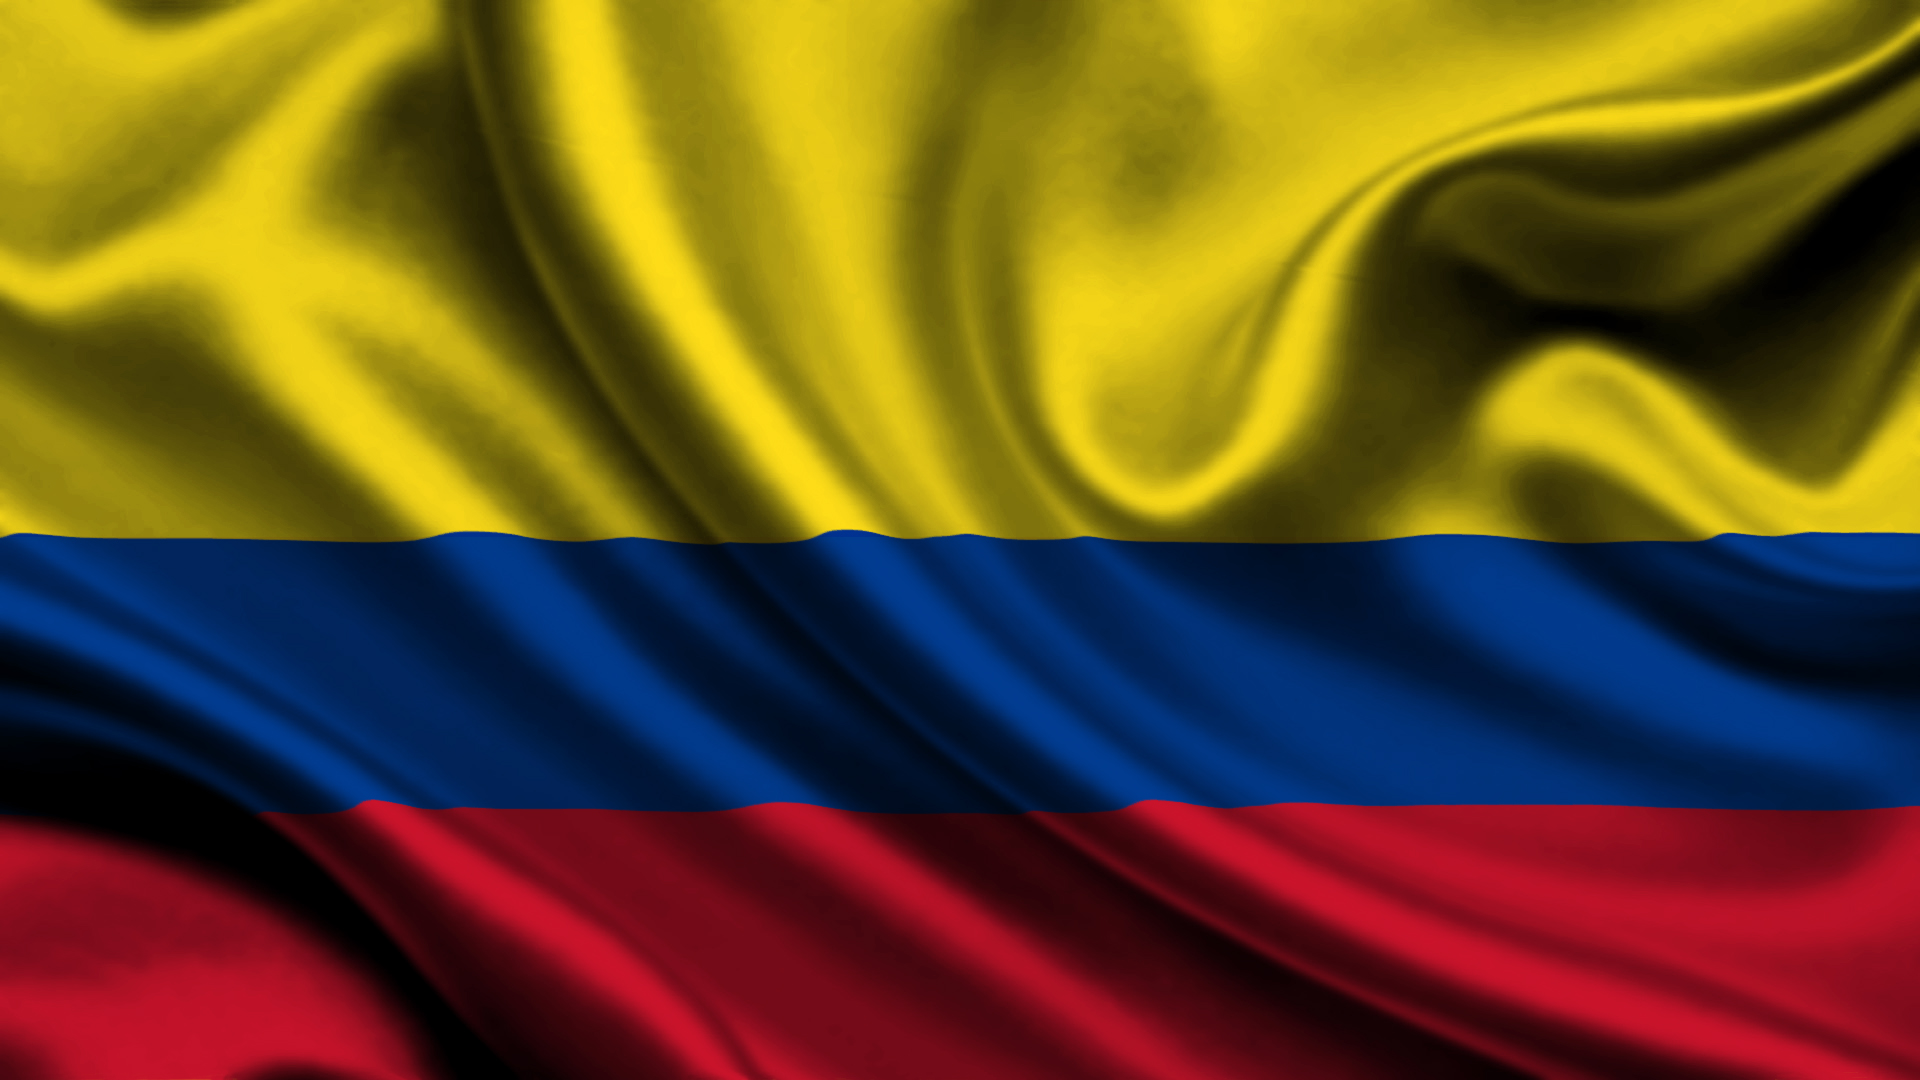 Colombia Image HD Wallpaper And Background